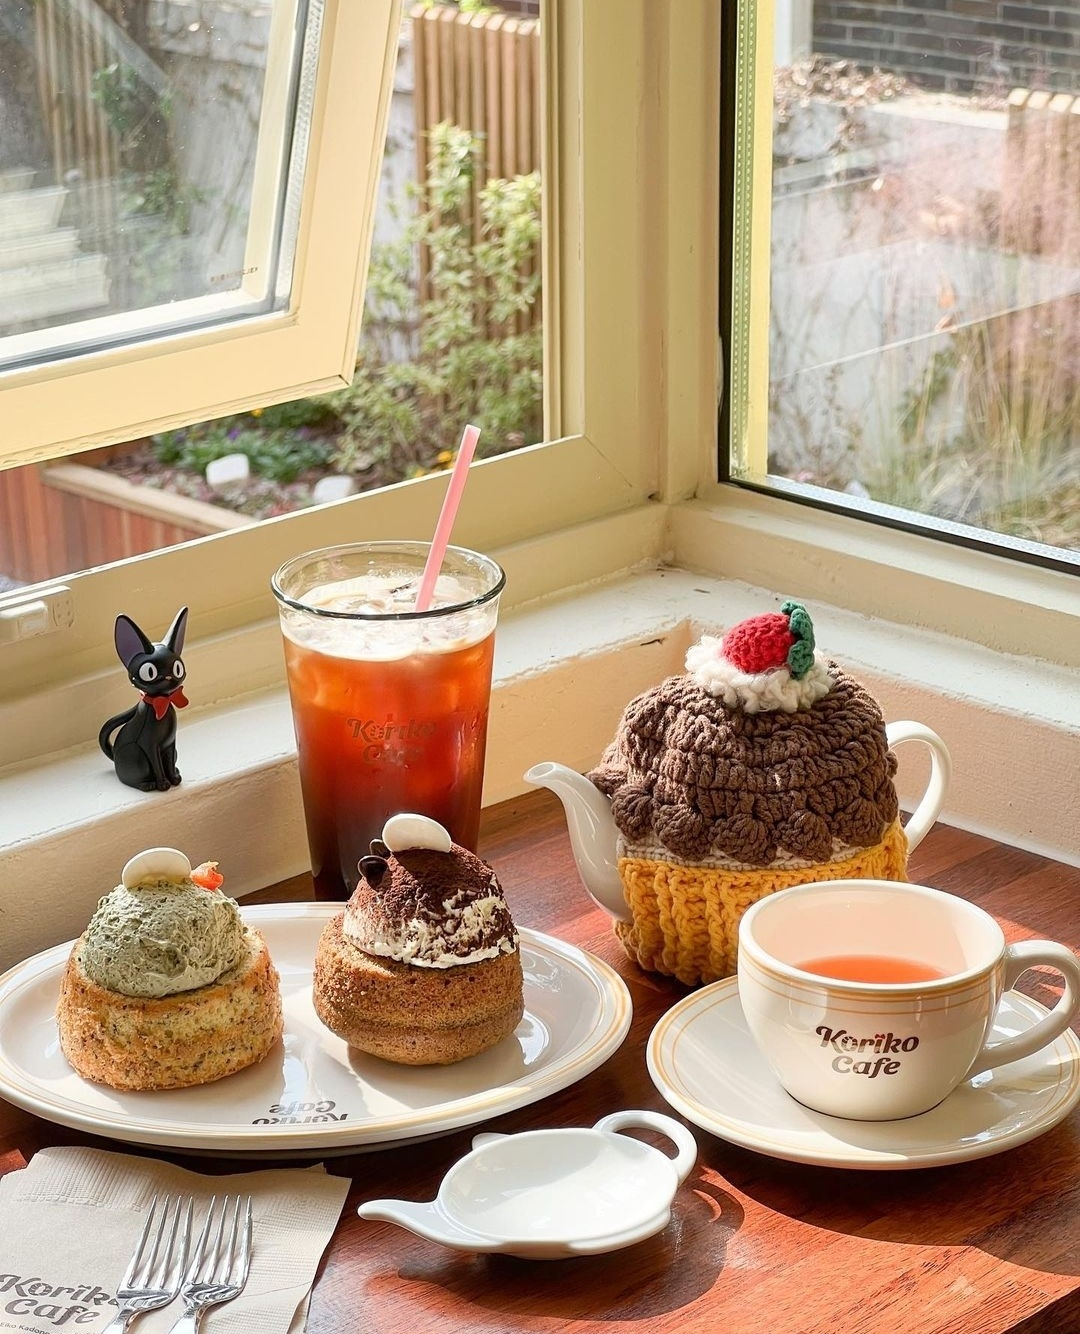 Desserts and coffee sold at “Koriko Cafe.